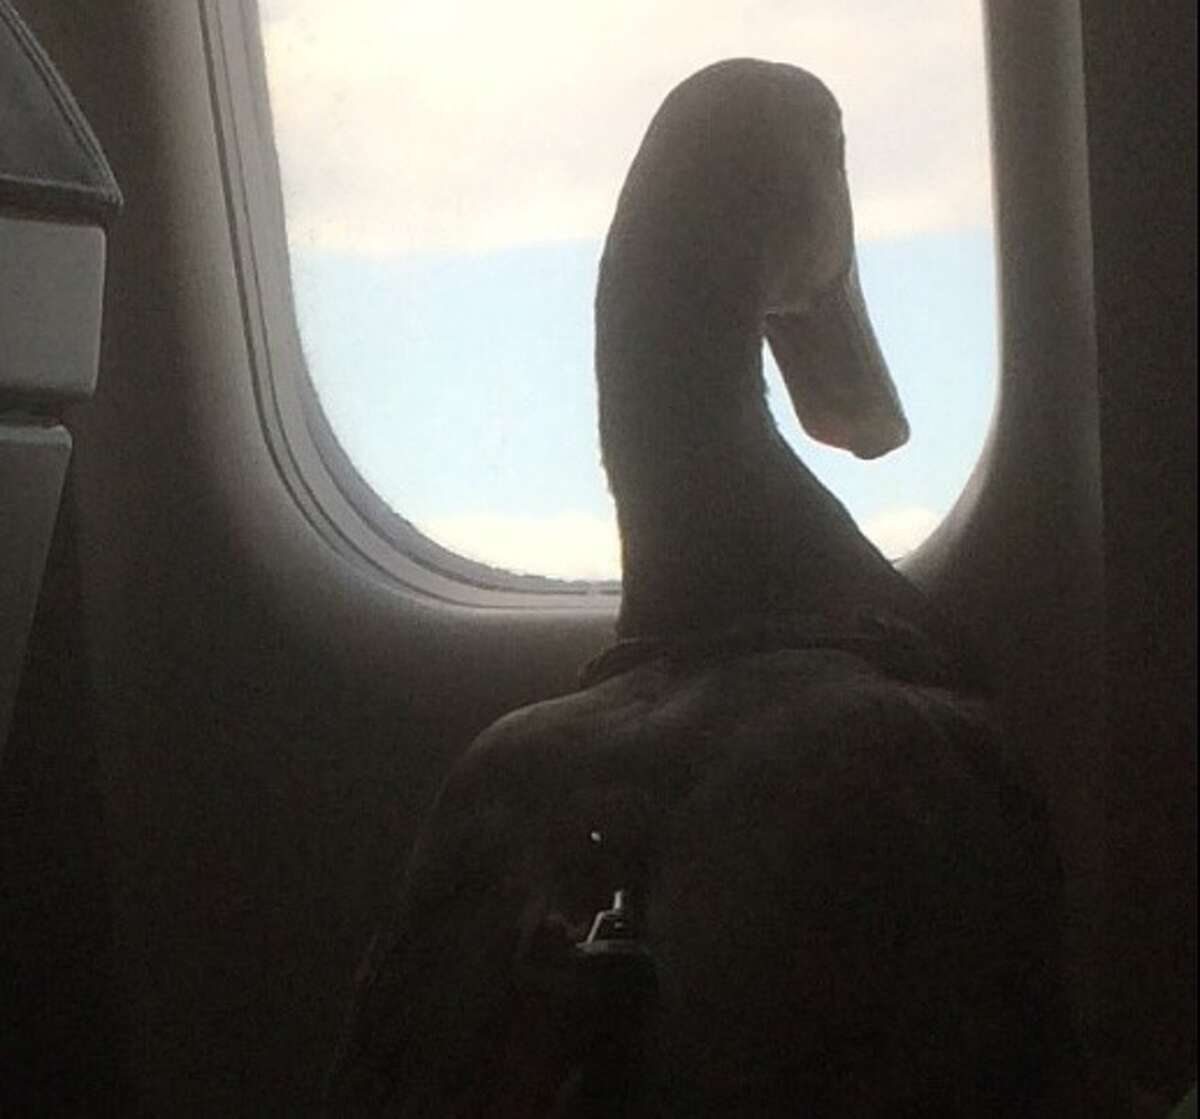 Daniel The Emotional Support Duck Goes Viral After Airplane Flight